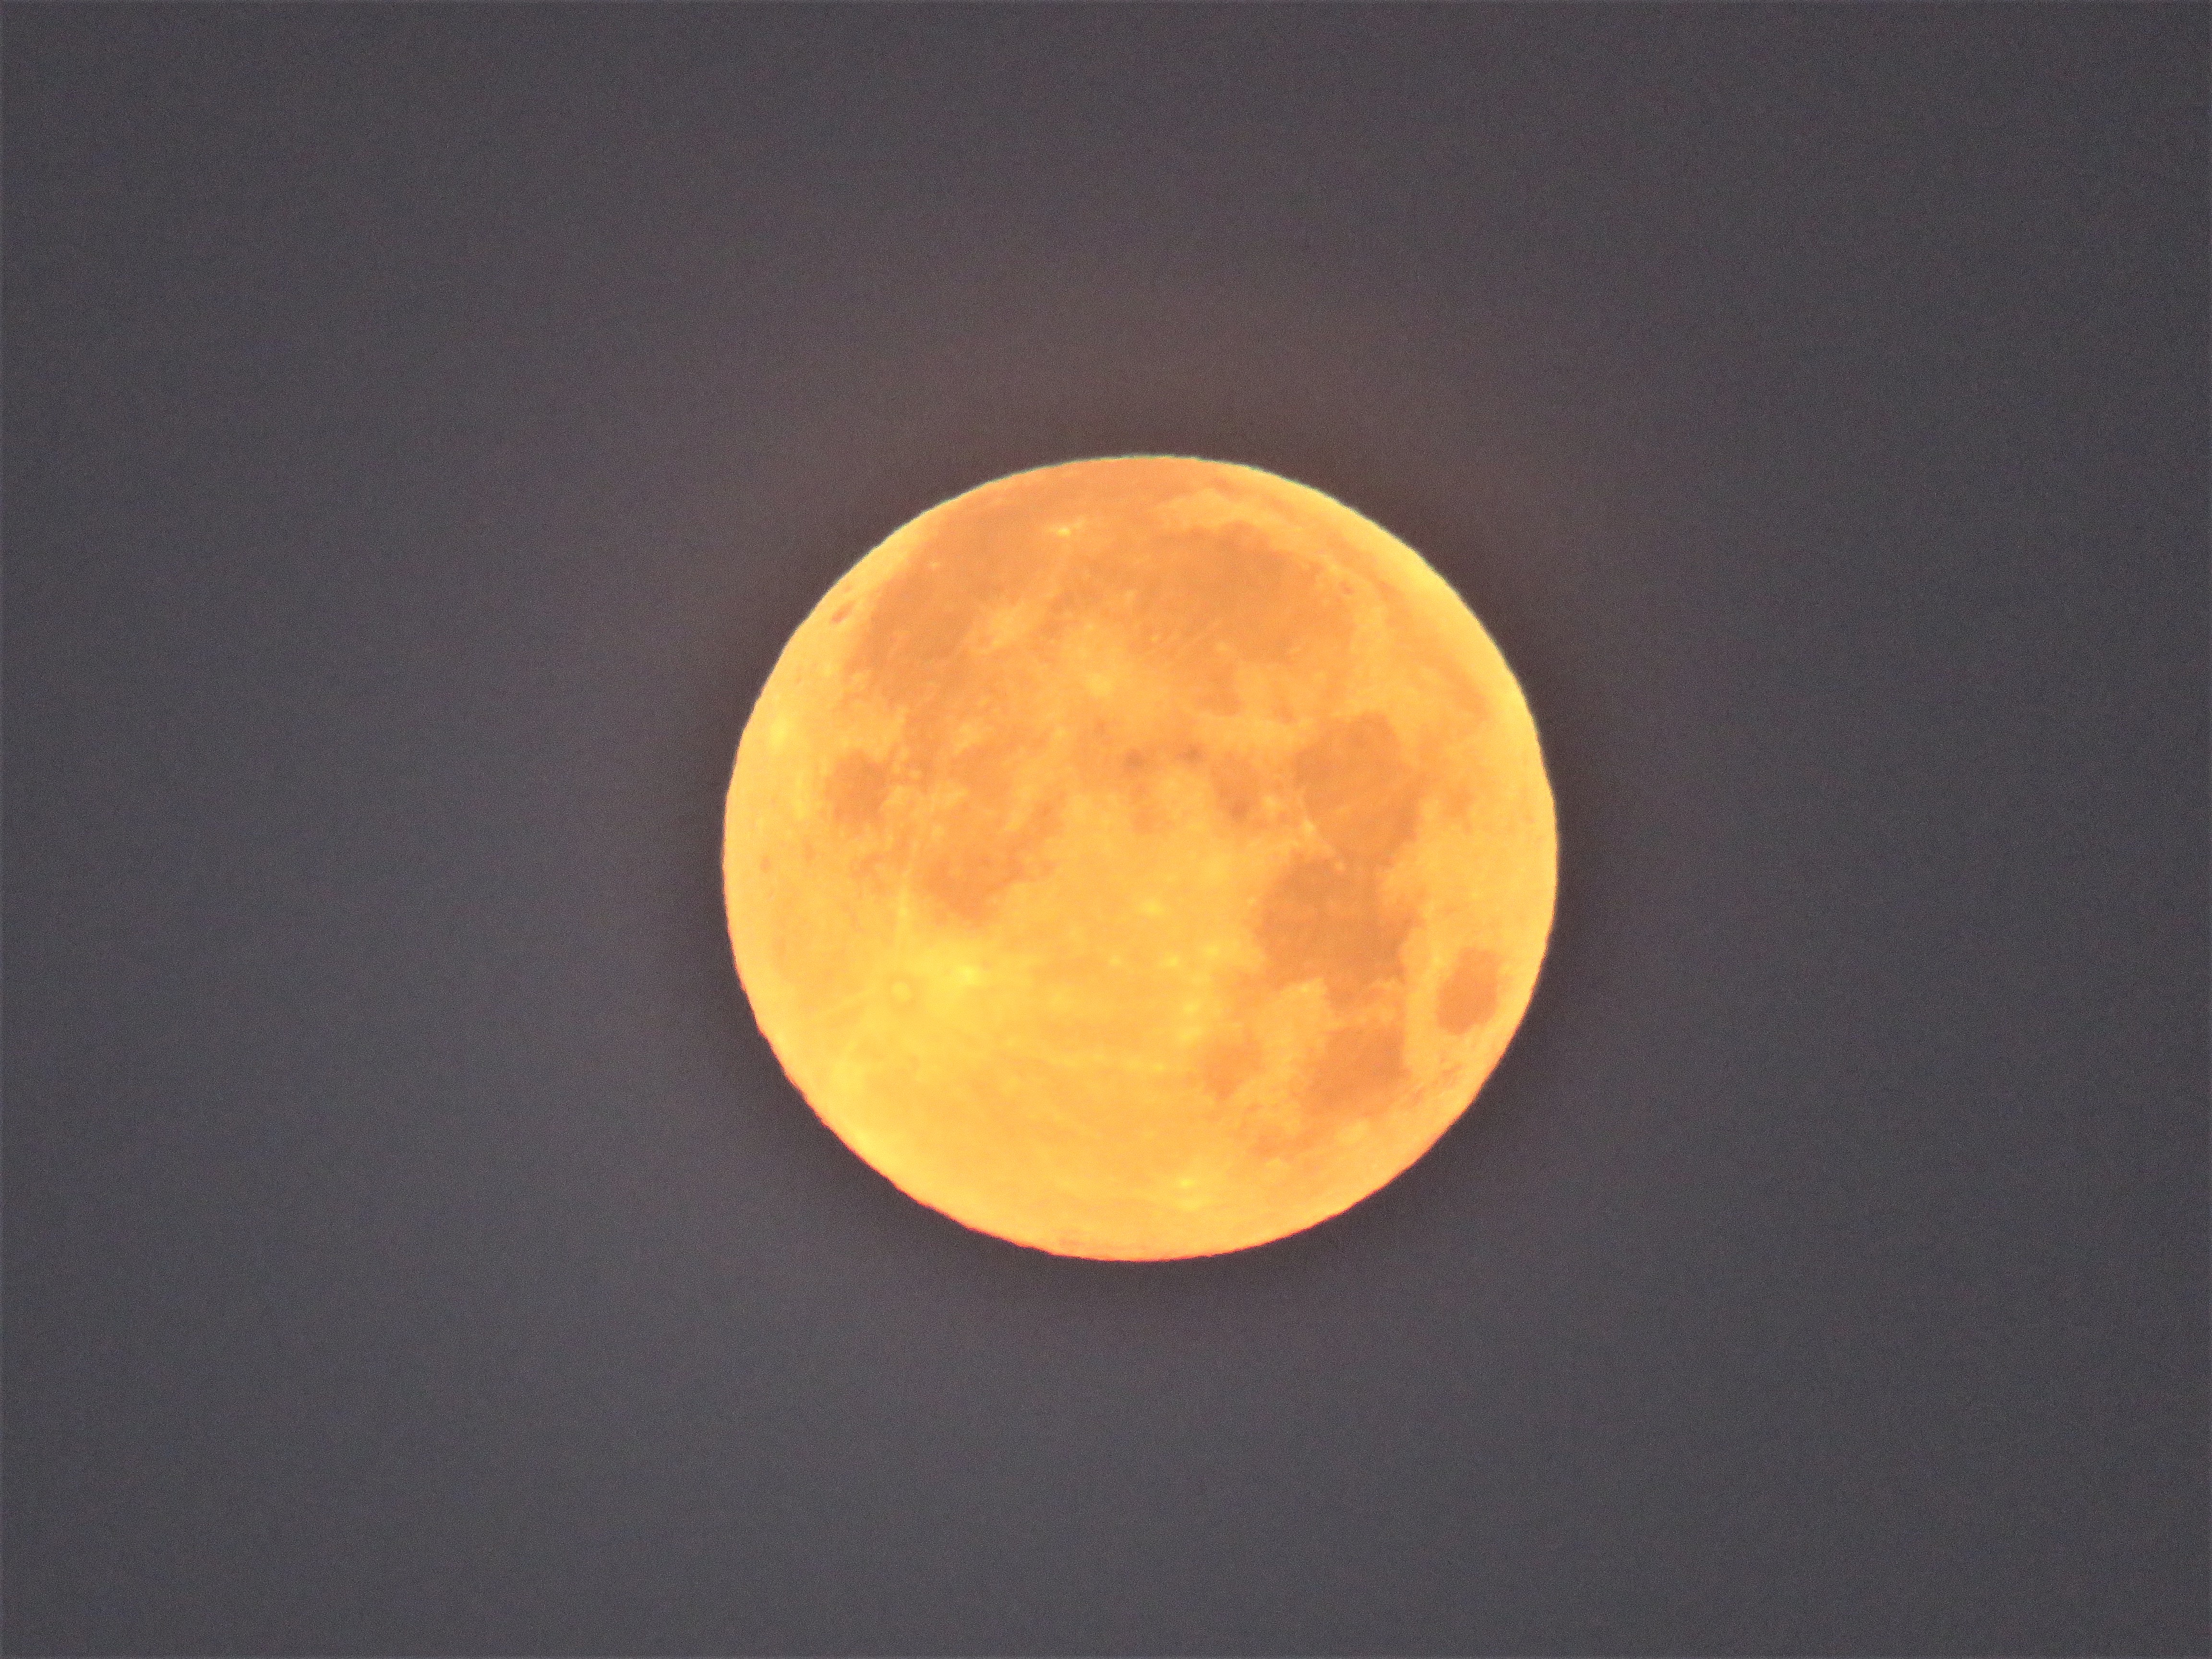 Astrophotographer Lisa Shislowski captured the 2020 Flower Moon as it was getting ready to set over Weston, Florida.